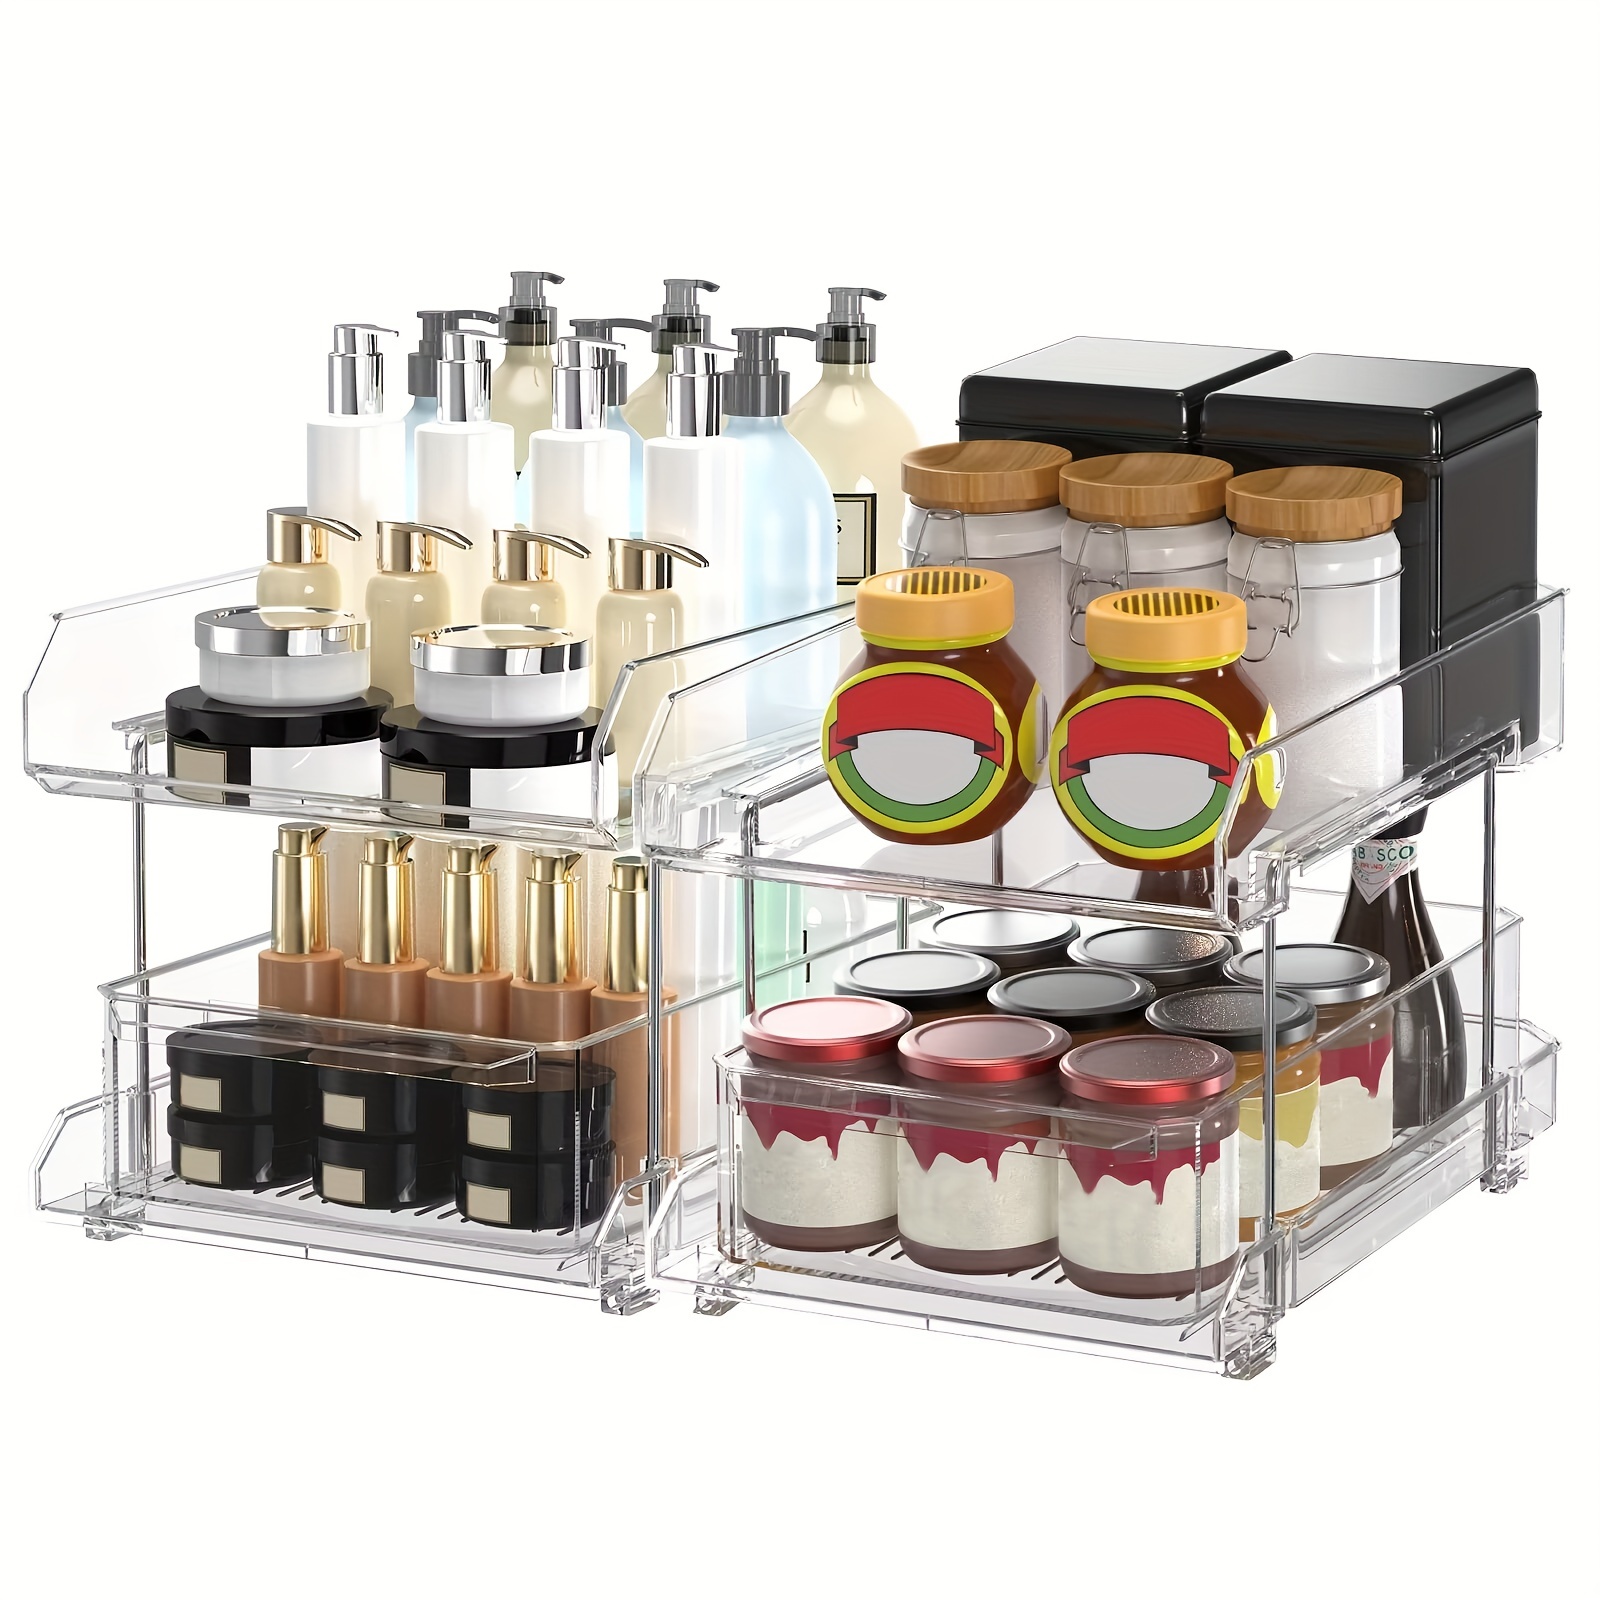 1PC 2 Tier Clear Pull-Out Organizer and Storage Rack - Food Pantry